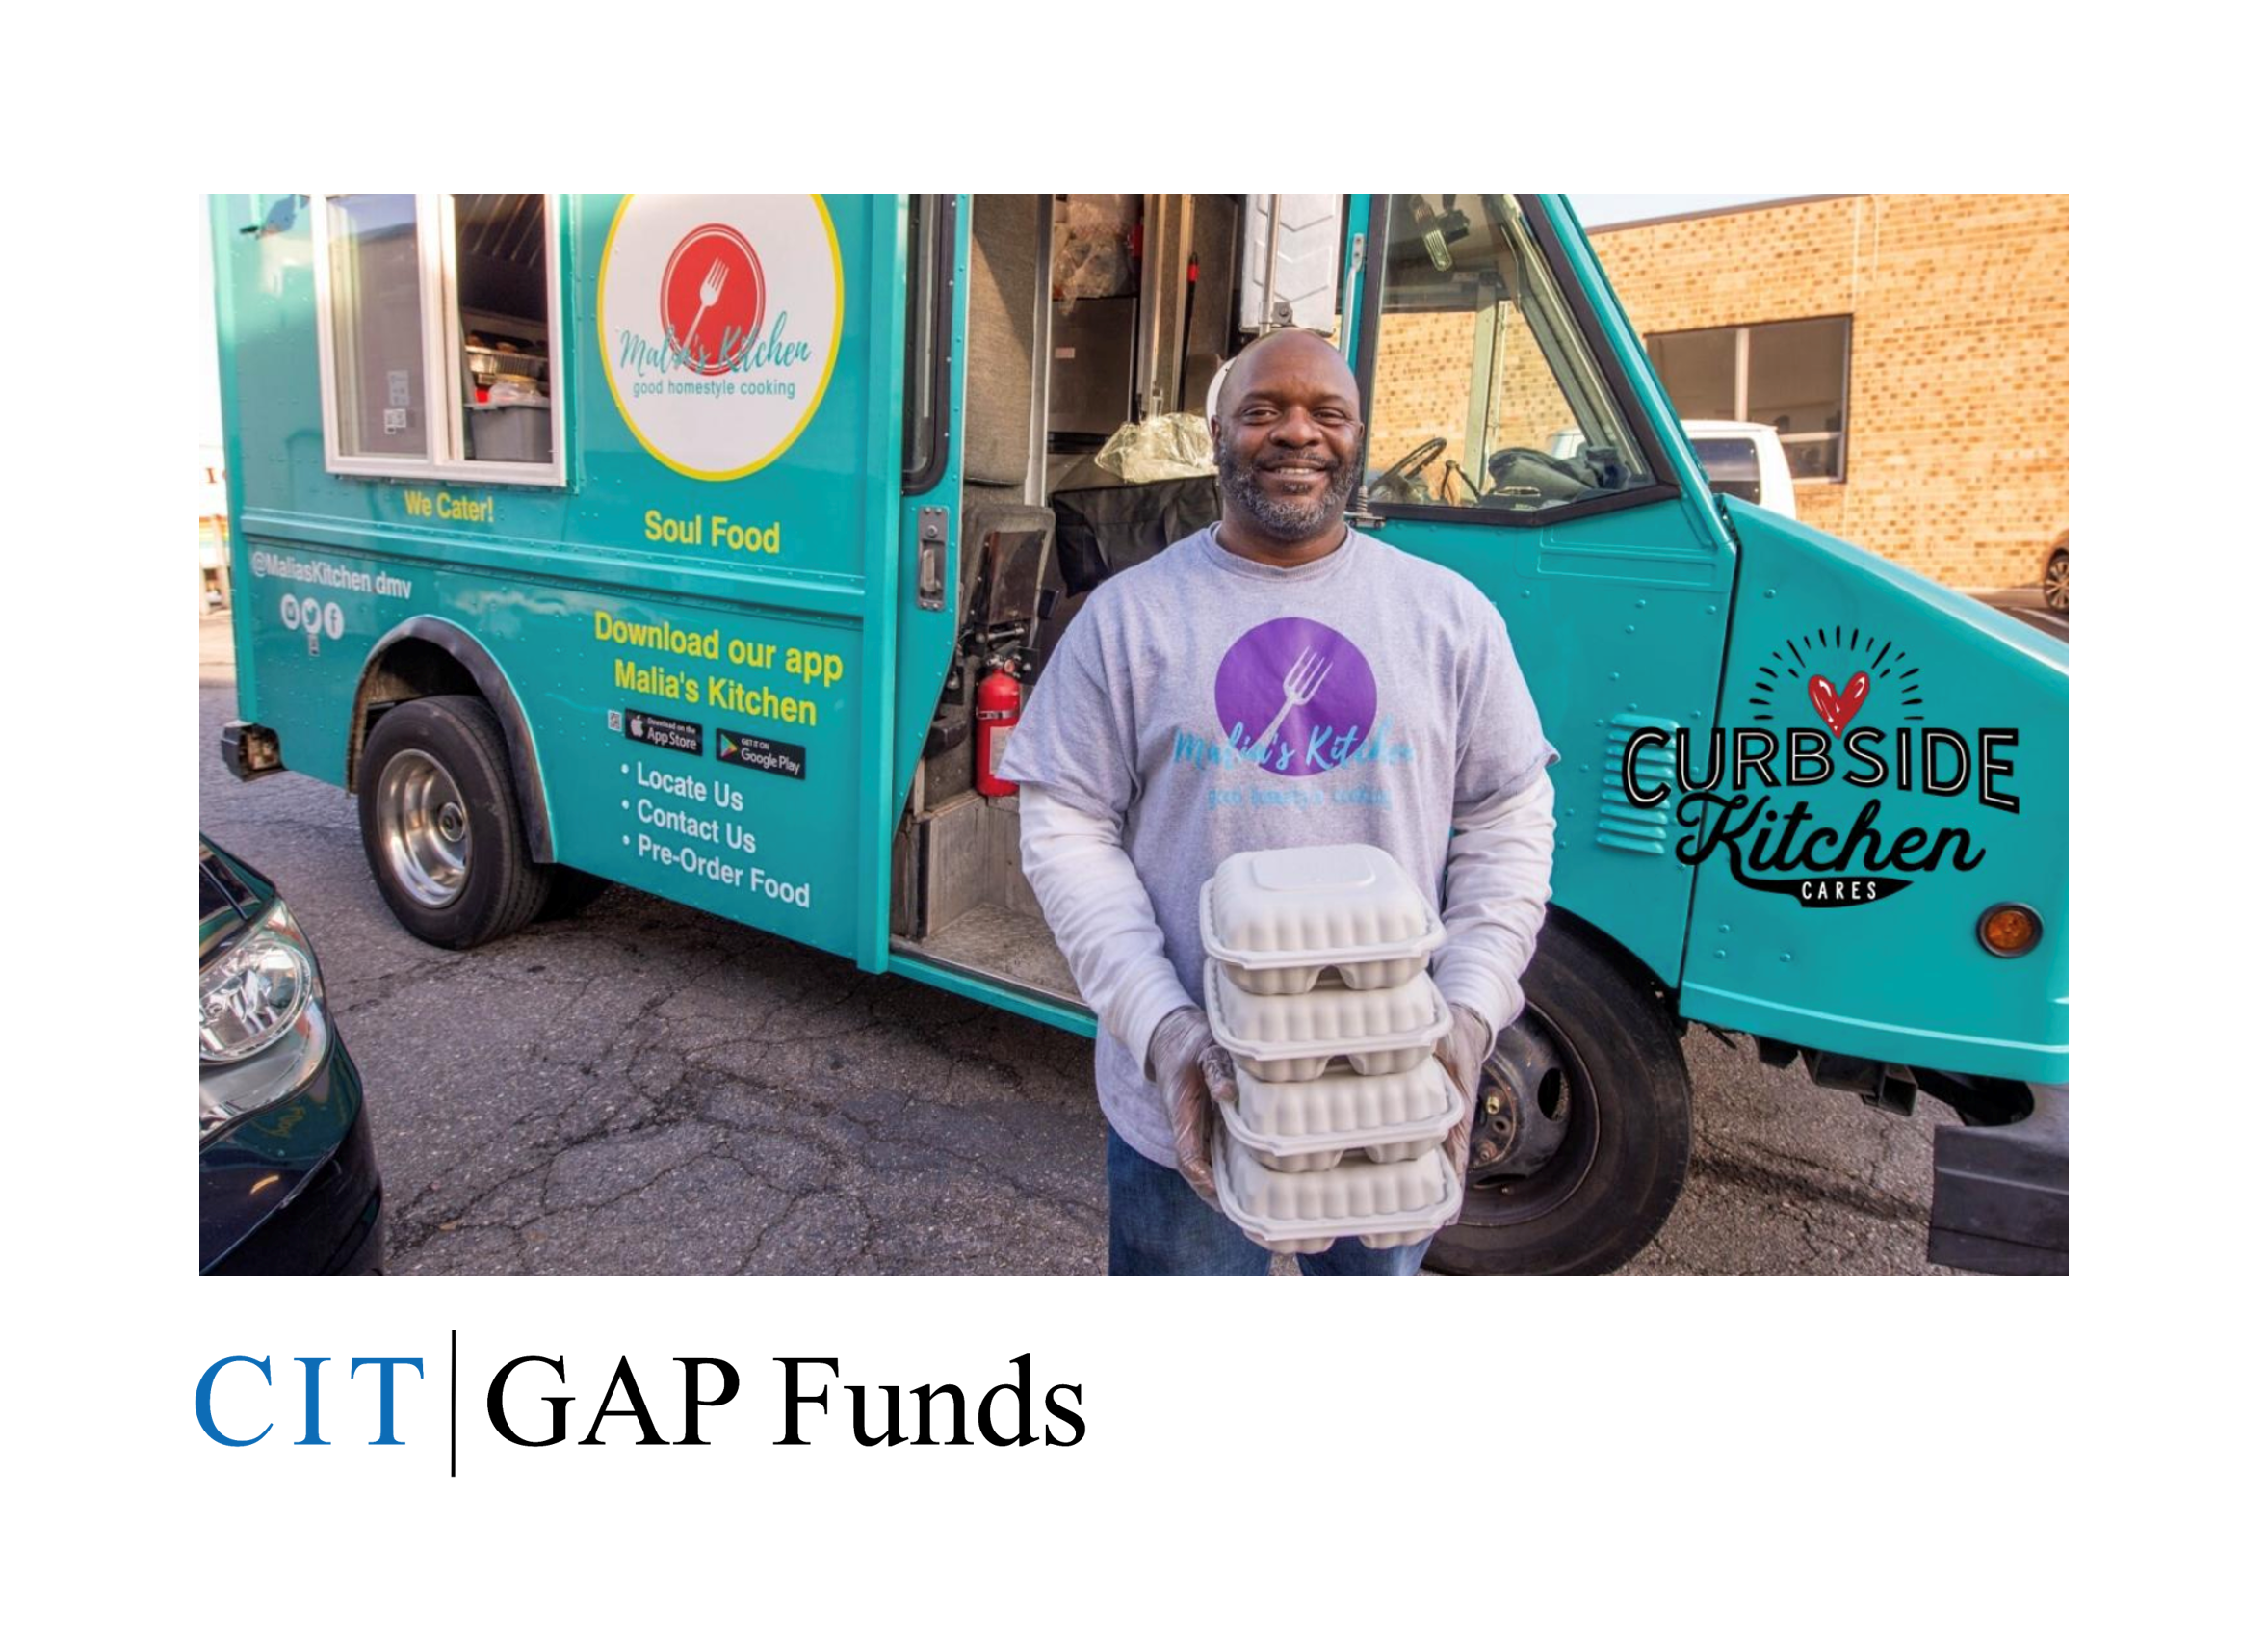 CIT GAP Funds Invests in Curbside Kitchen to Continue Connecting Building Owners and Multi-Family Properties with Food Trucks